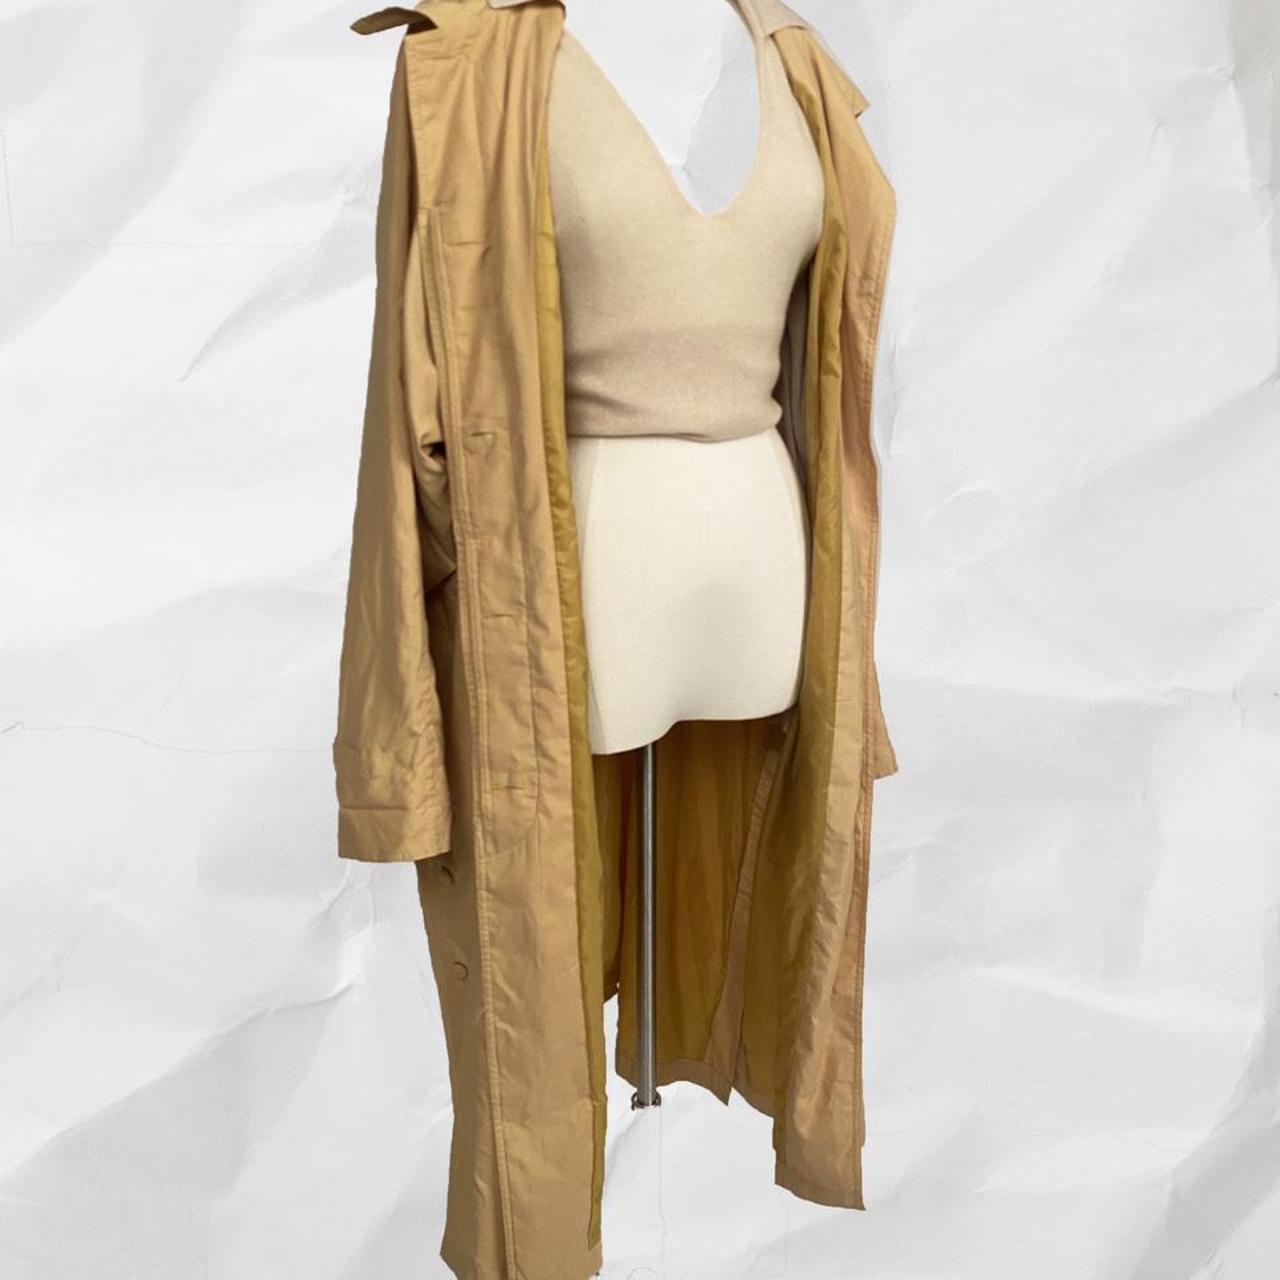 Product Image 2 - Roamans yellow trench coat 
Super